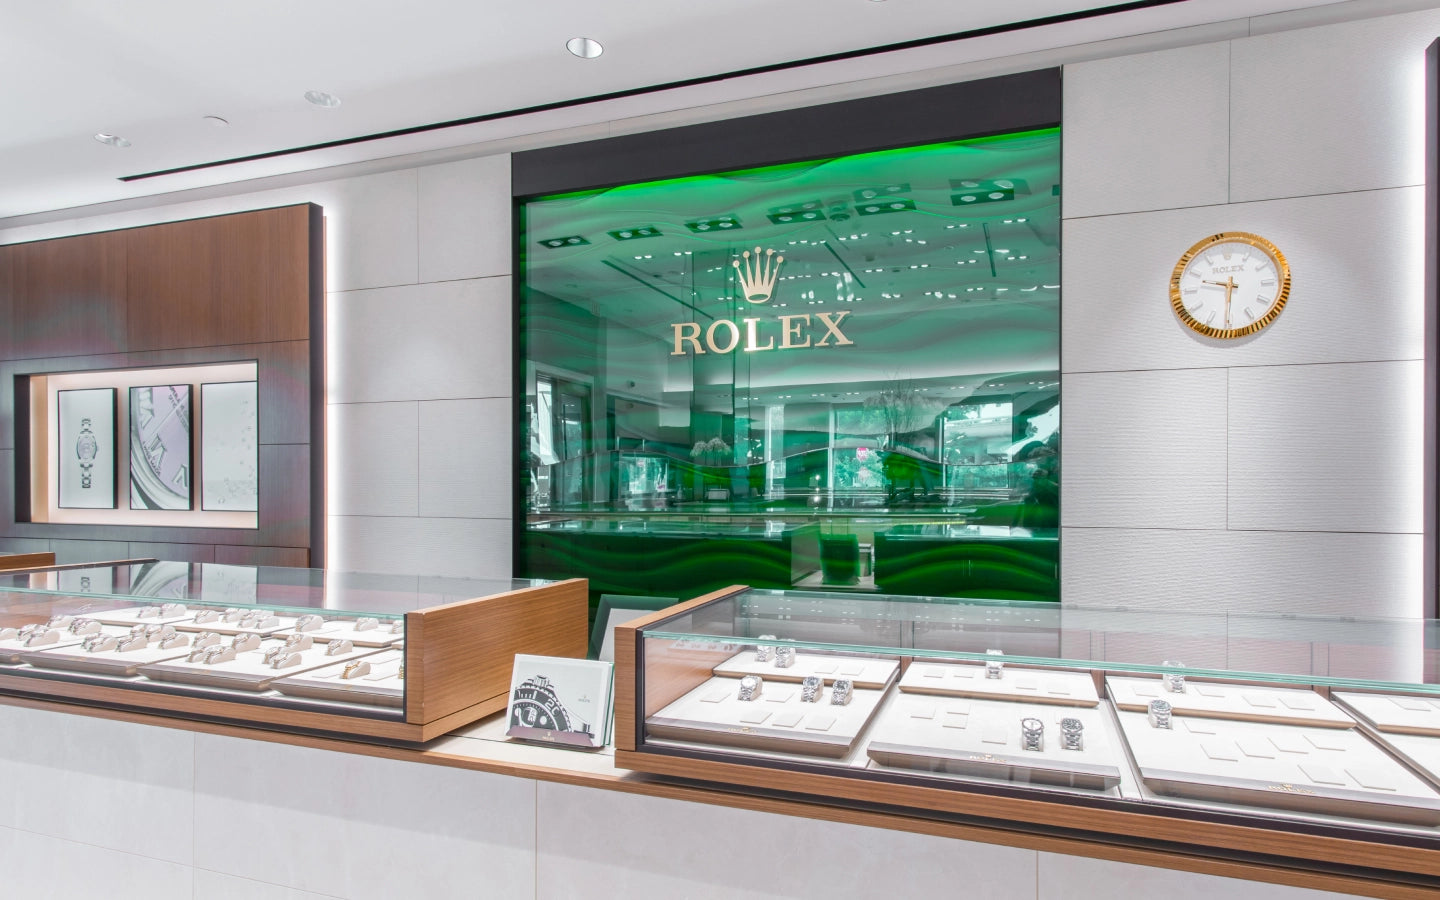 Rolex watches at Shreve & Co. in Palo Alto, CA